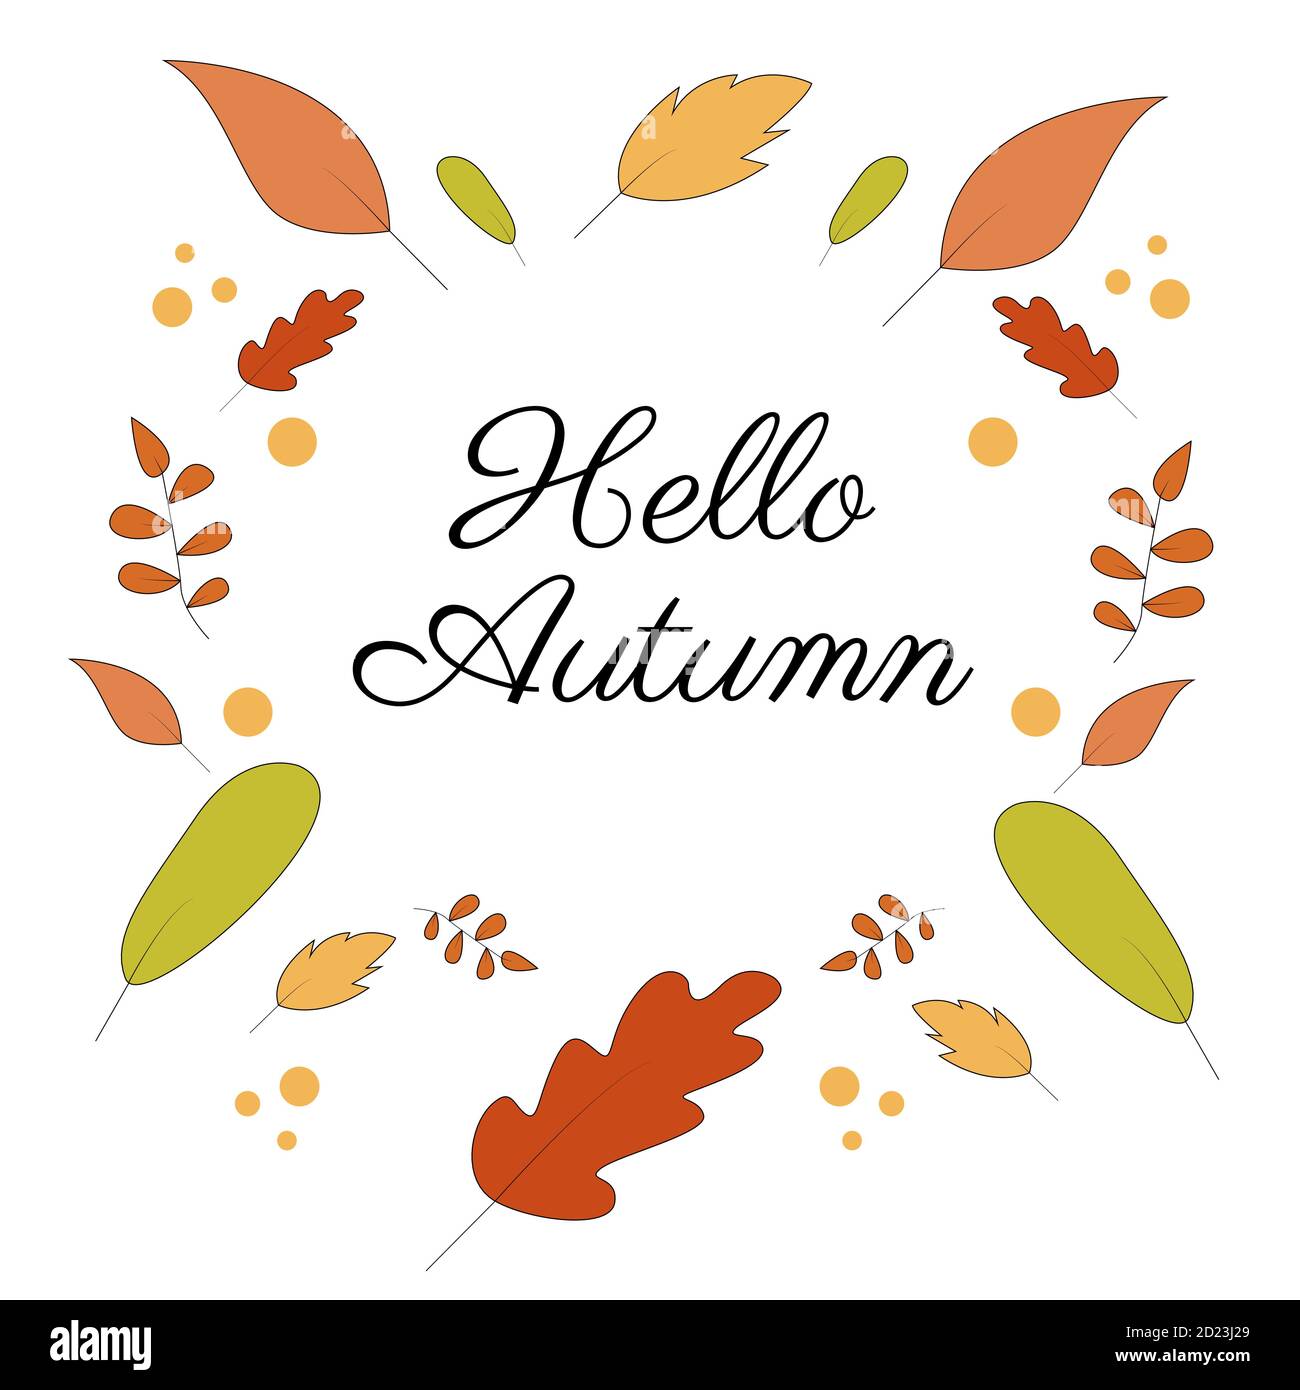 Illustration vector design of fall leaves of autumn background template Stock Vector